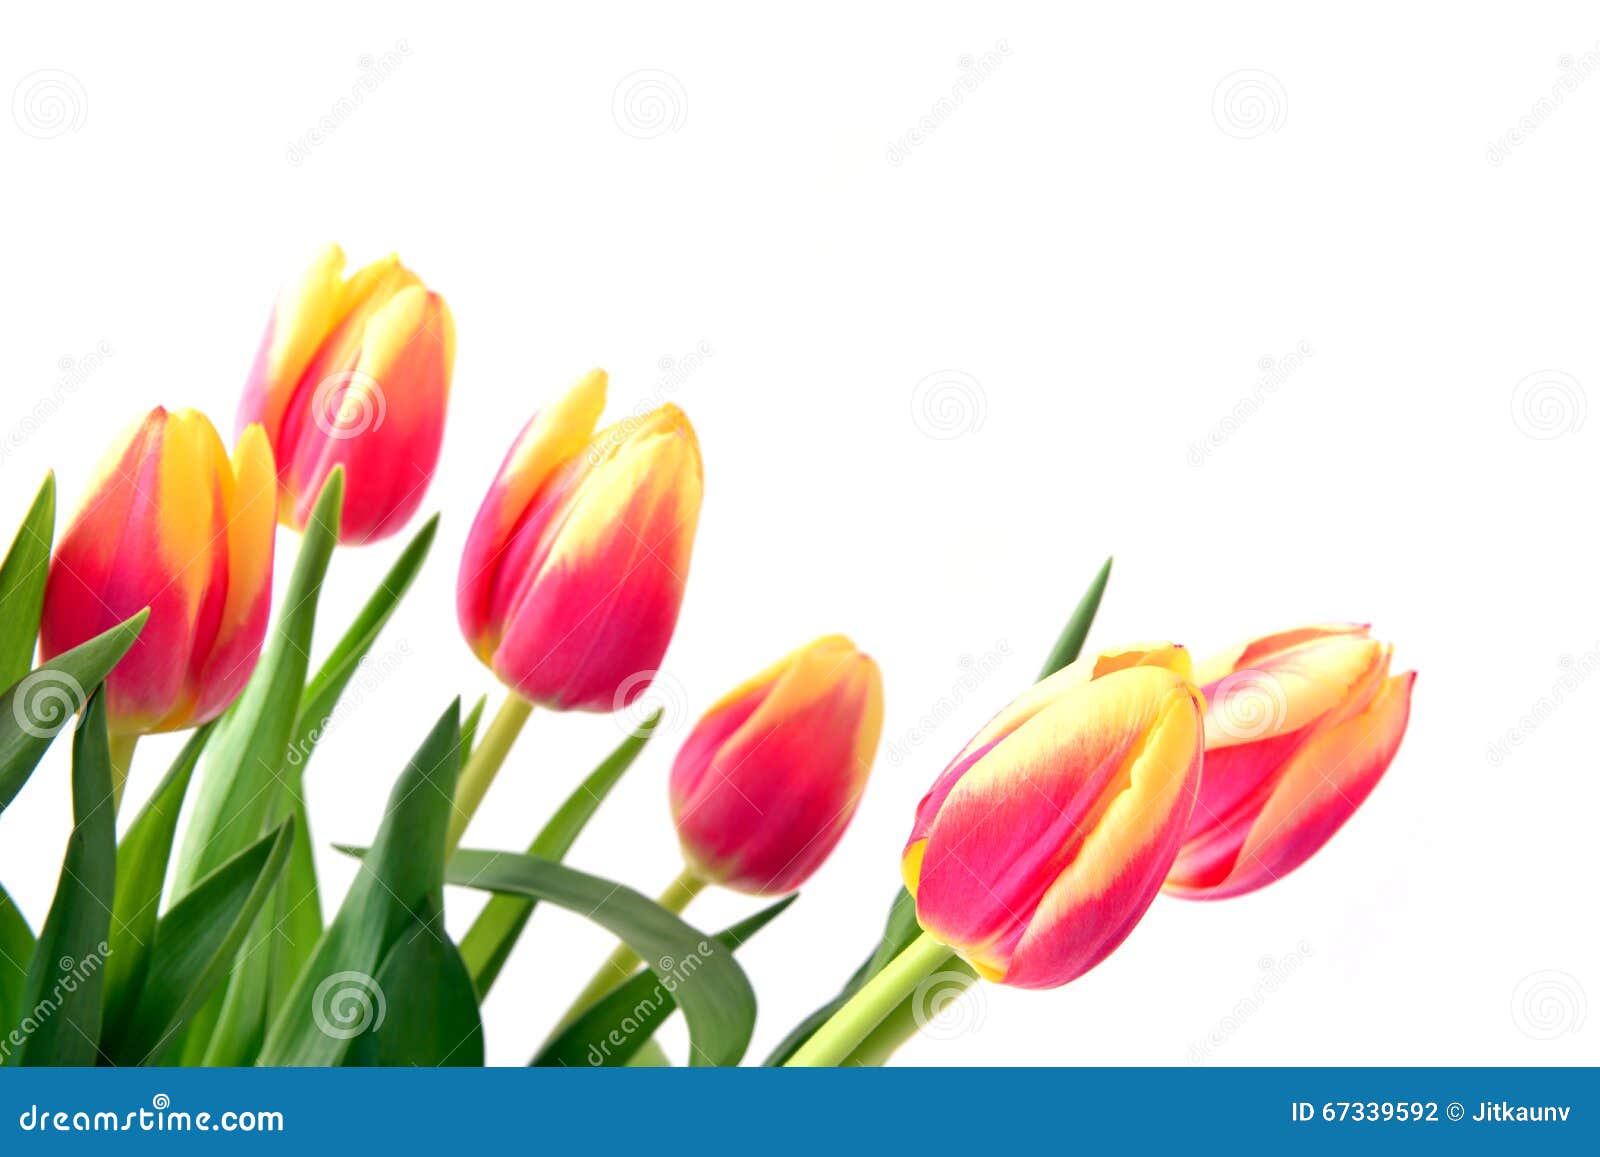 Tulips stock photo. Image of color, bouquet, blossom - 67339592